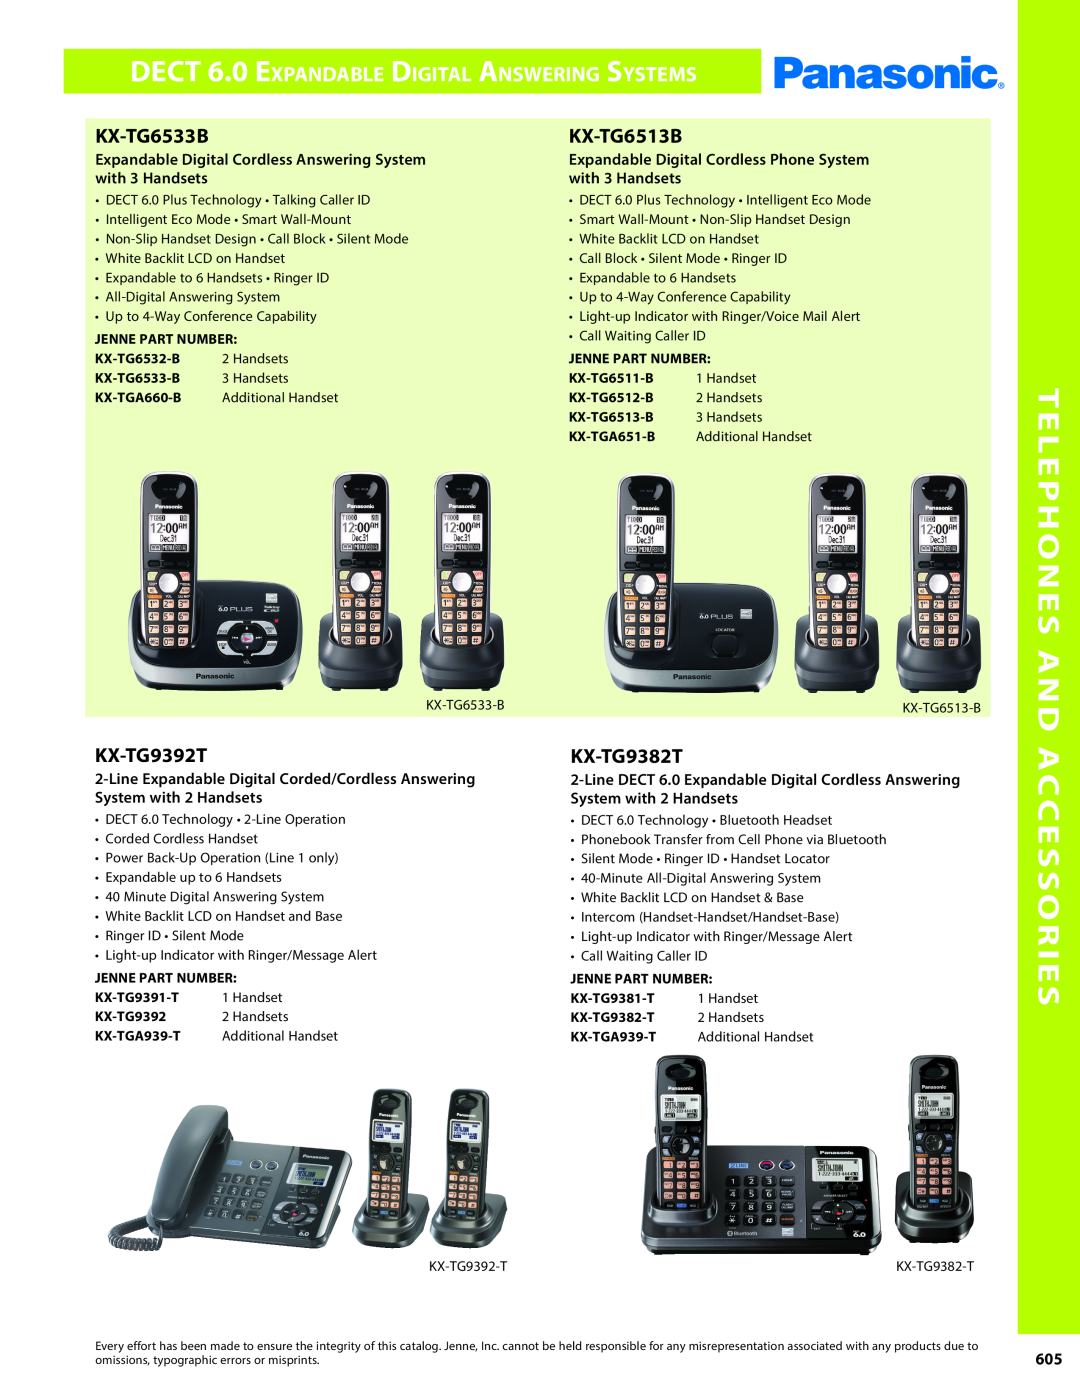 Panasonic PMPU2000 Telephones And, Accessories, DECT 6.0 Expandable Digital Answering Systems, KX-TG6533B, KX-TG6513B 